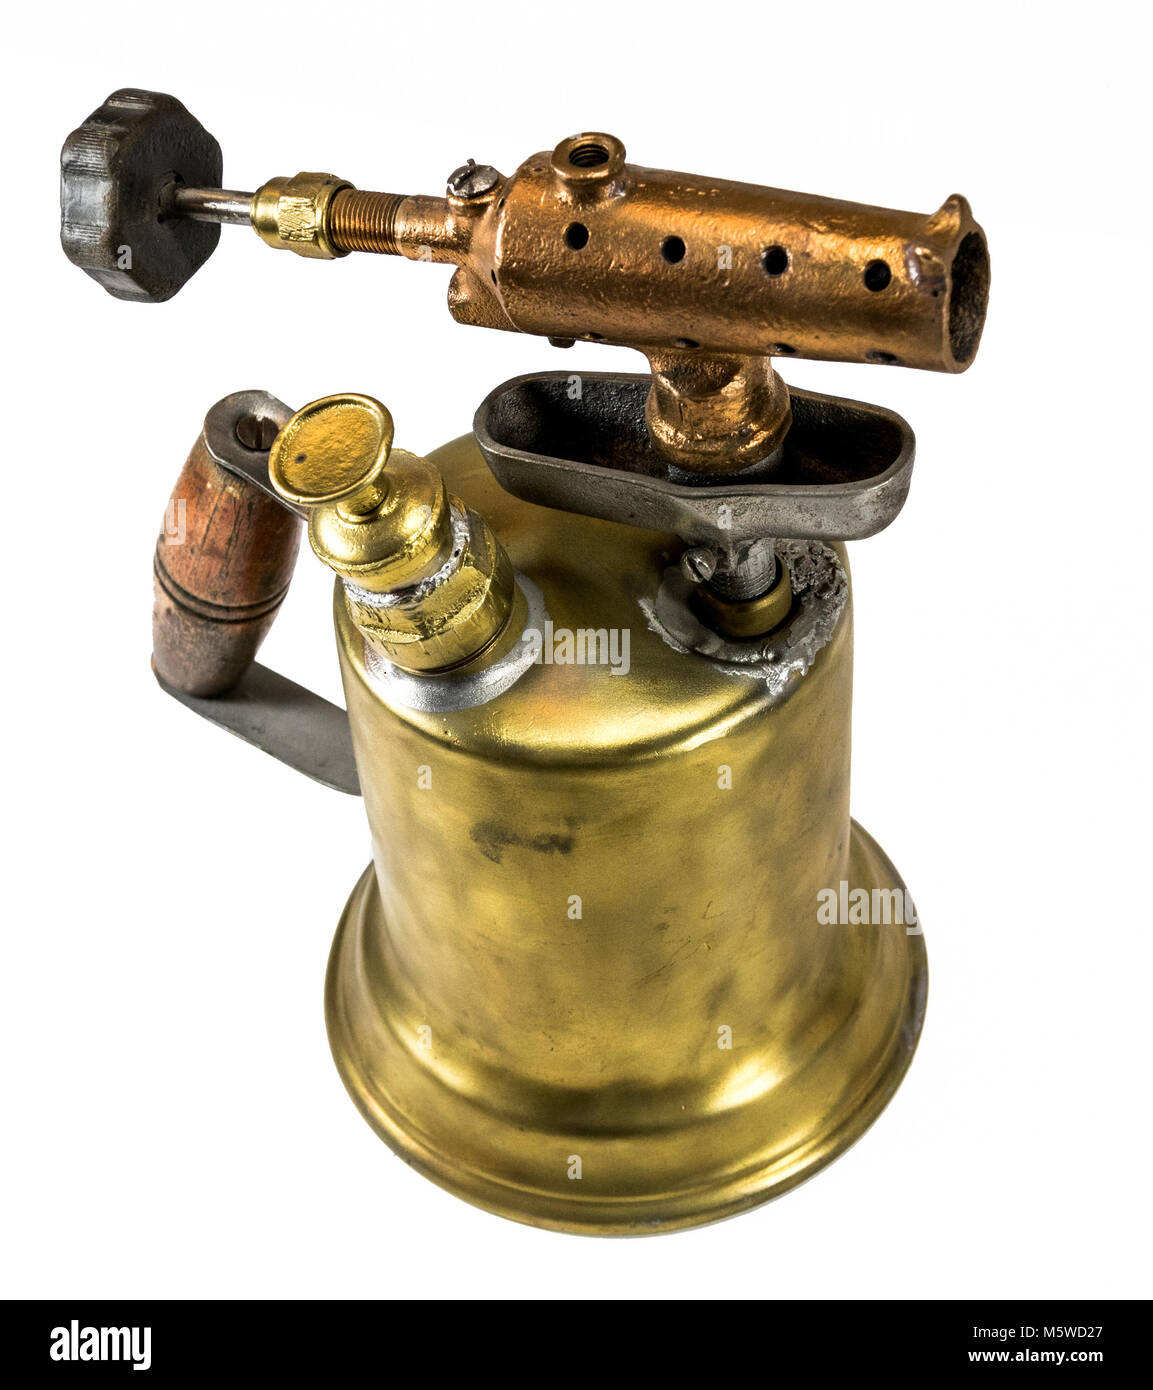 Old fashioned brass blow torch with wooden handle and bronze nozzle Stock Photo